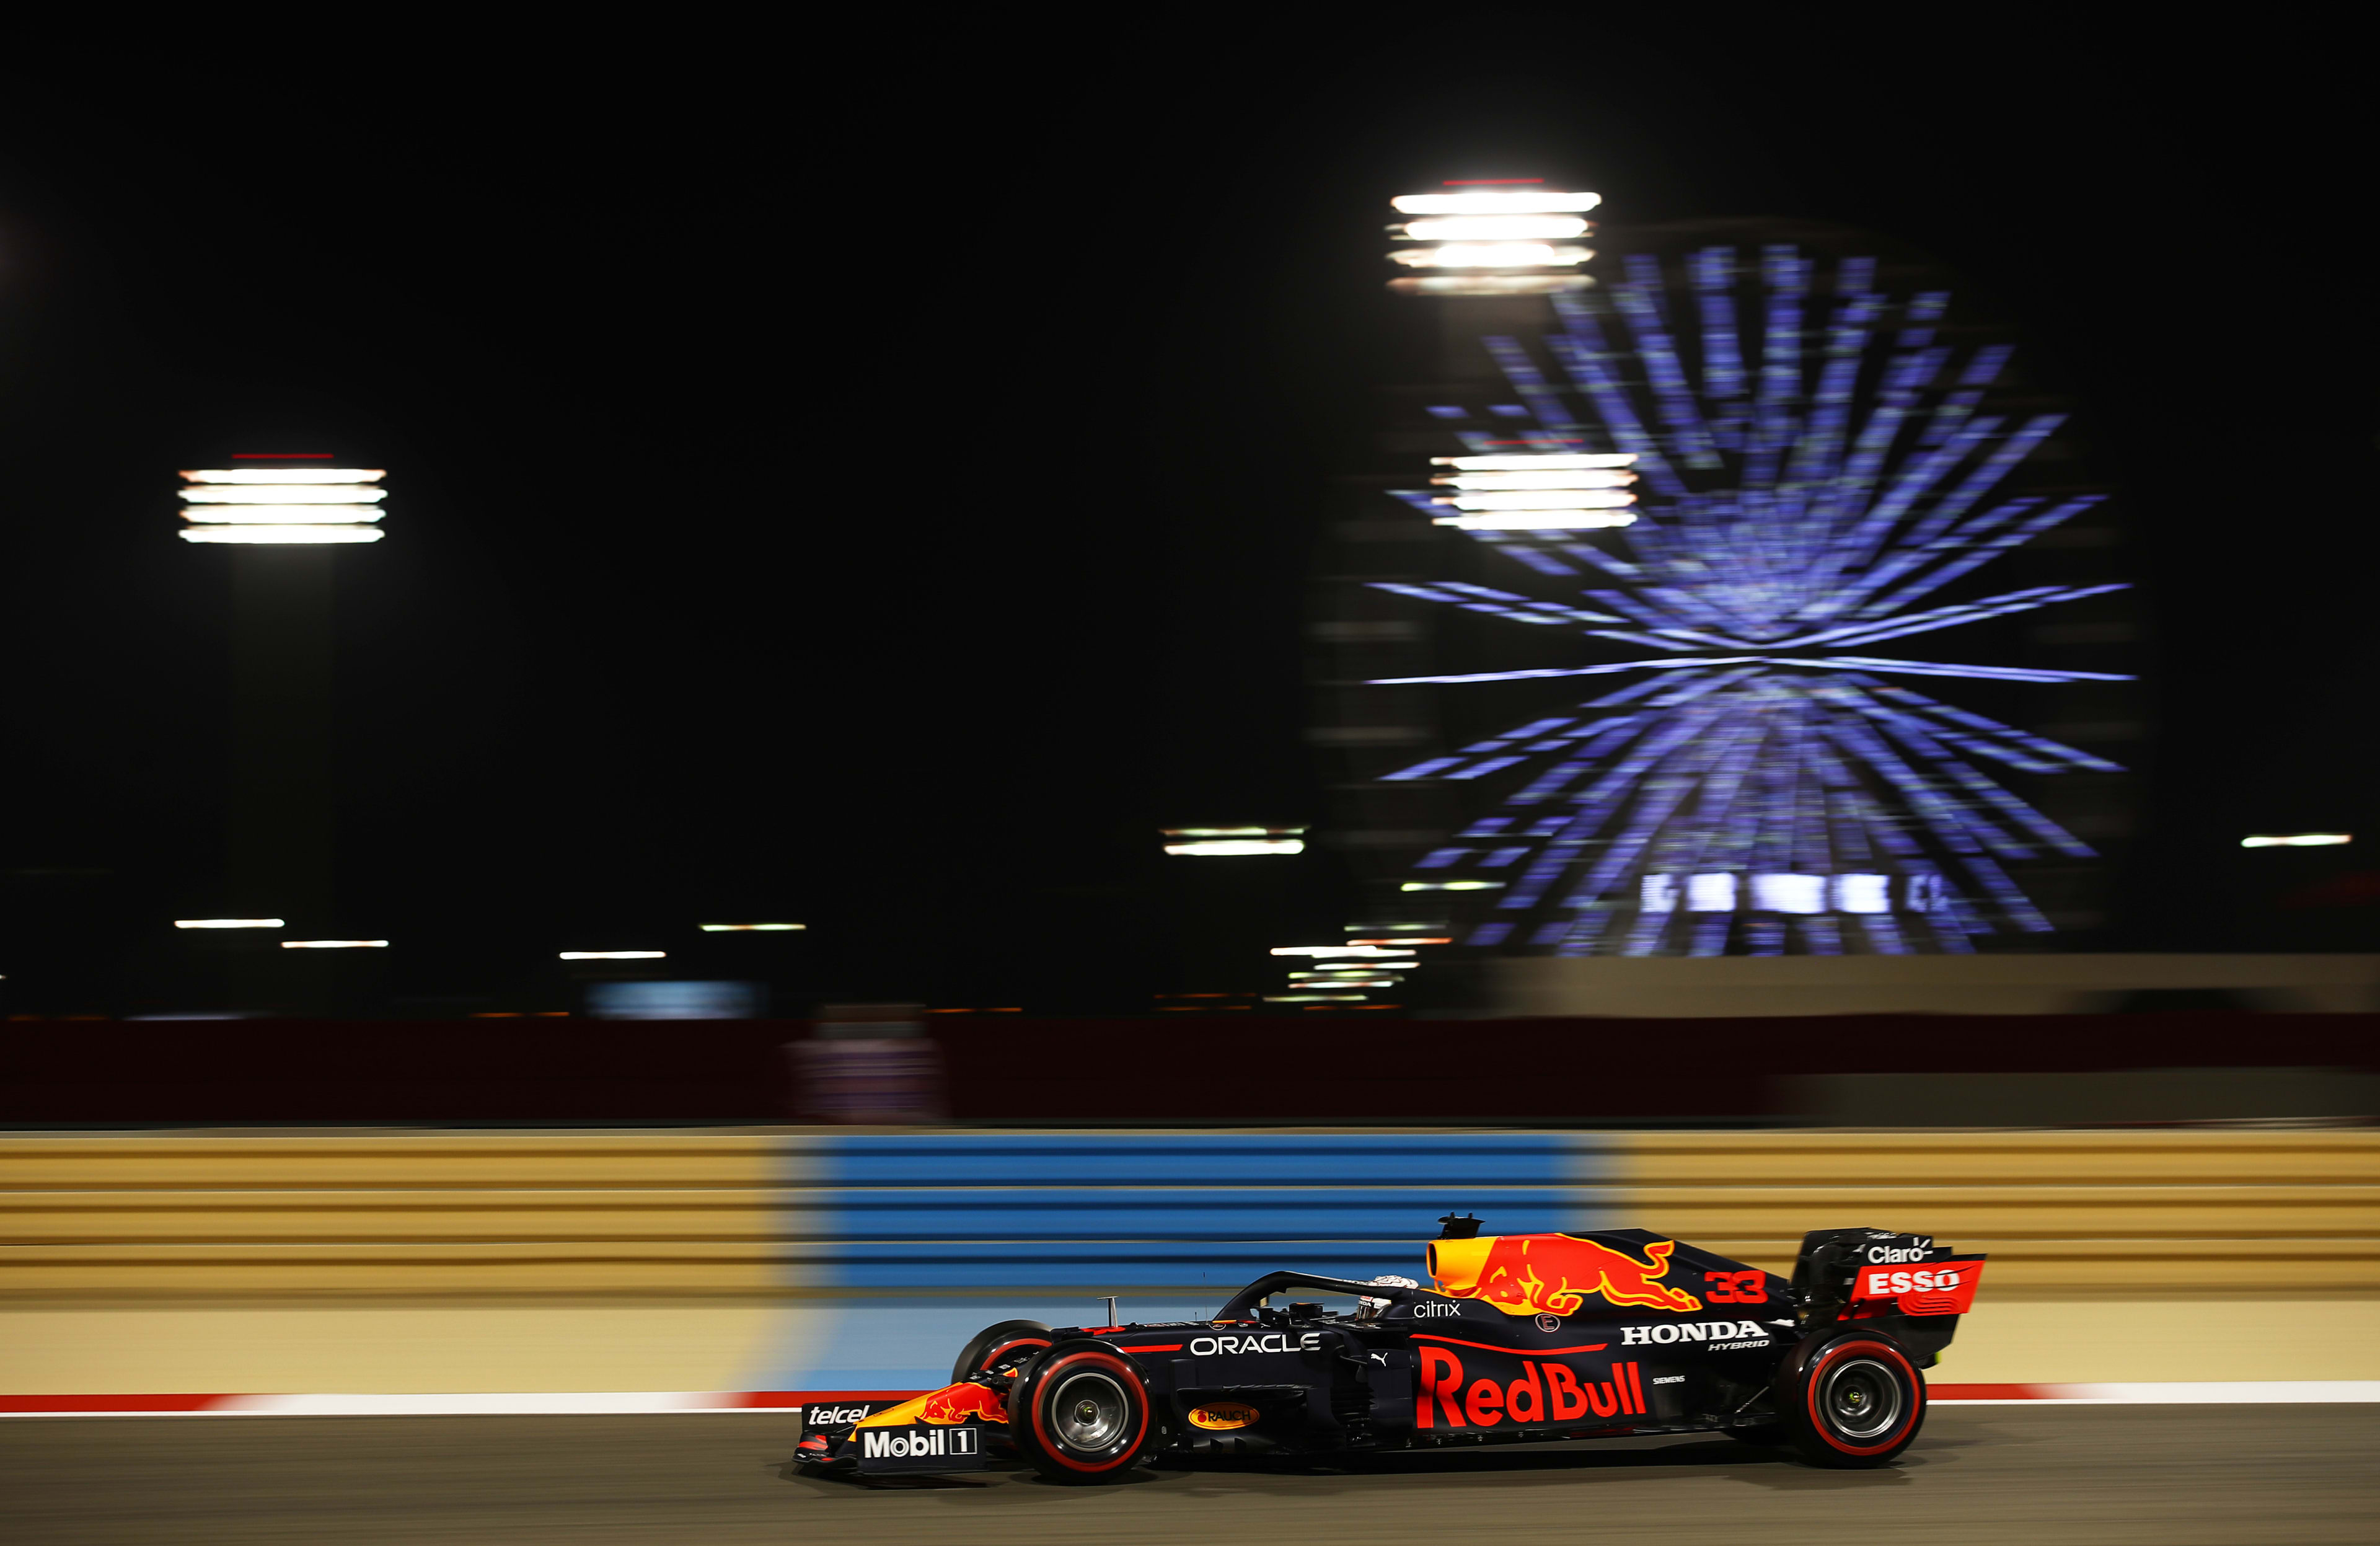 FP2 report and highlights from the 2021 Bahrain Grand Prix: Max Verstappen  heads Norris to complete clean sweep of Friday sessions in Bahrain |  Formula 1®